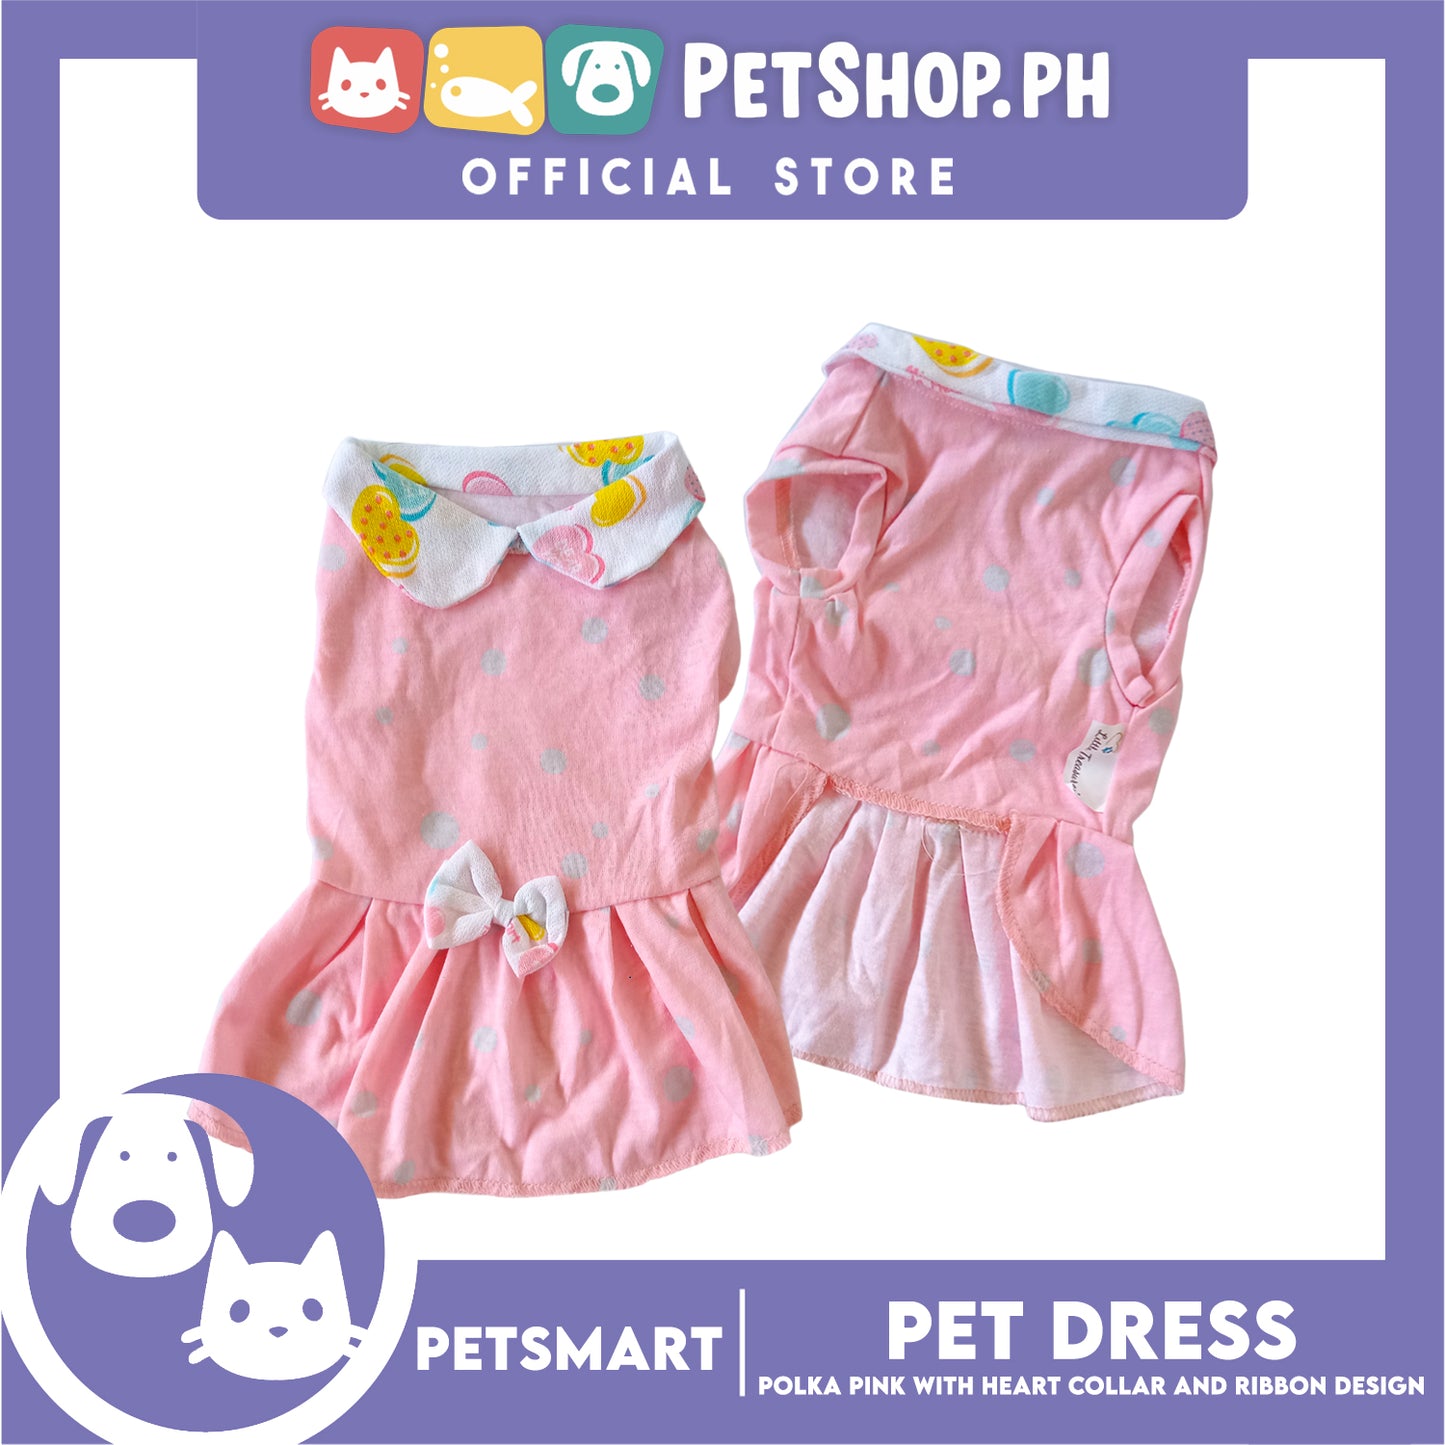 Pet Dress, Polka Pink with Heart Collar and Ribbon Design DG-CTN158XL (XL) Perfect Fit For Dogs And Cats, Pet Clothes, Soft and Comfortable Pet Clothing